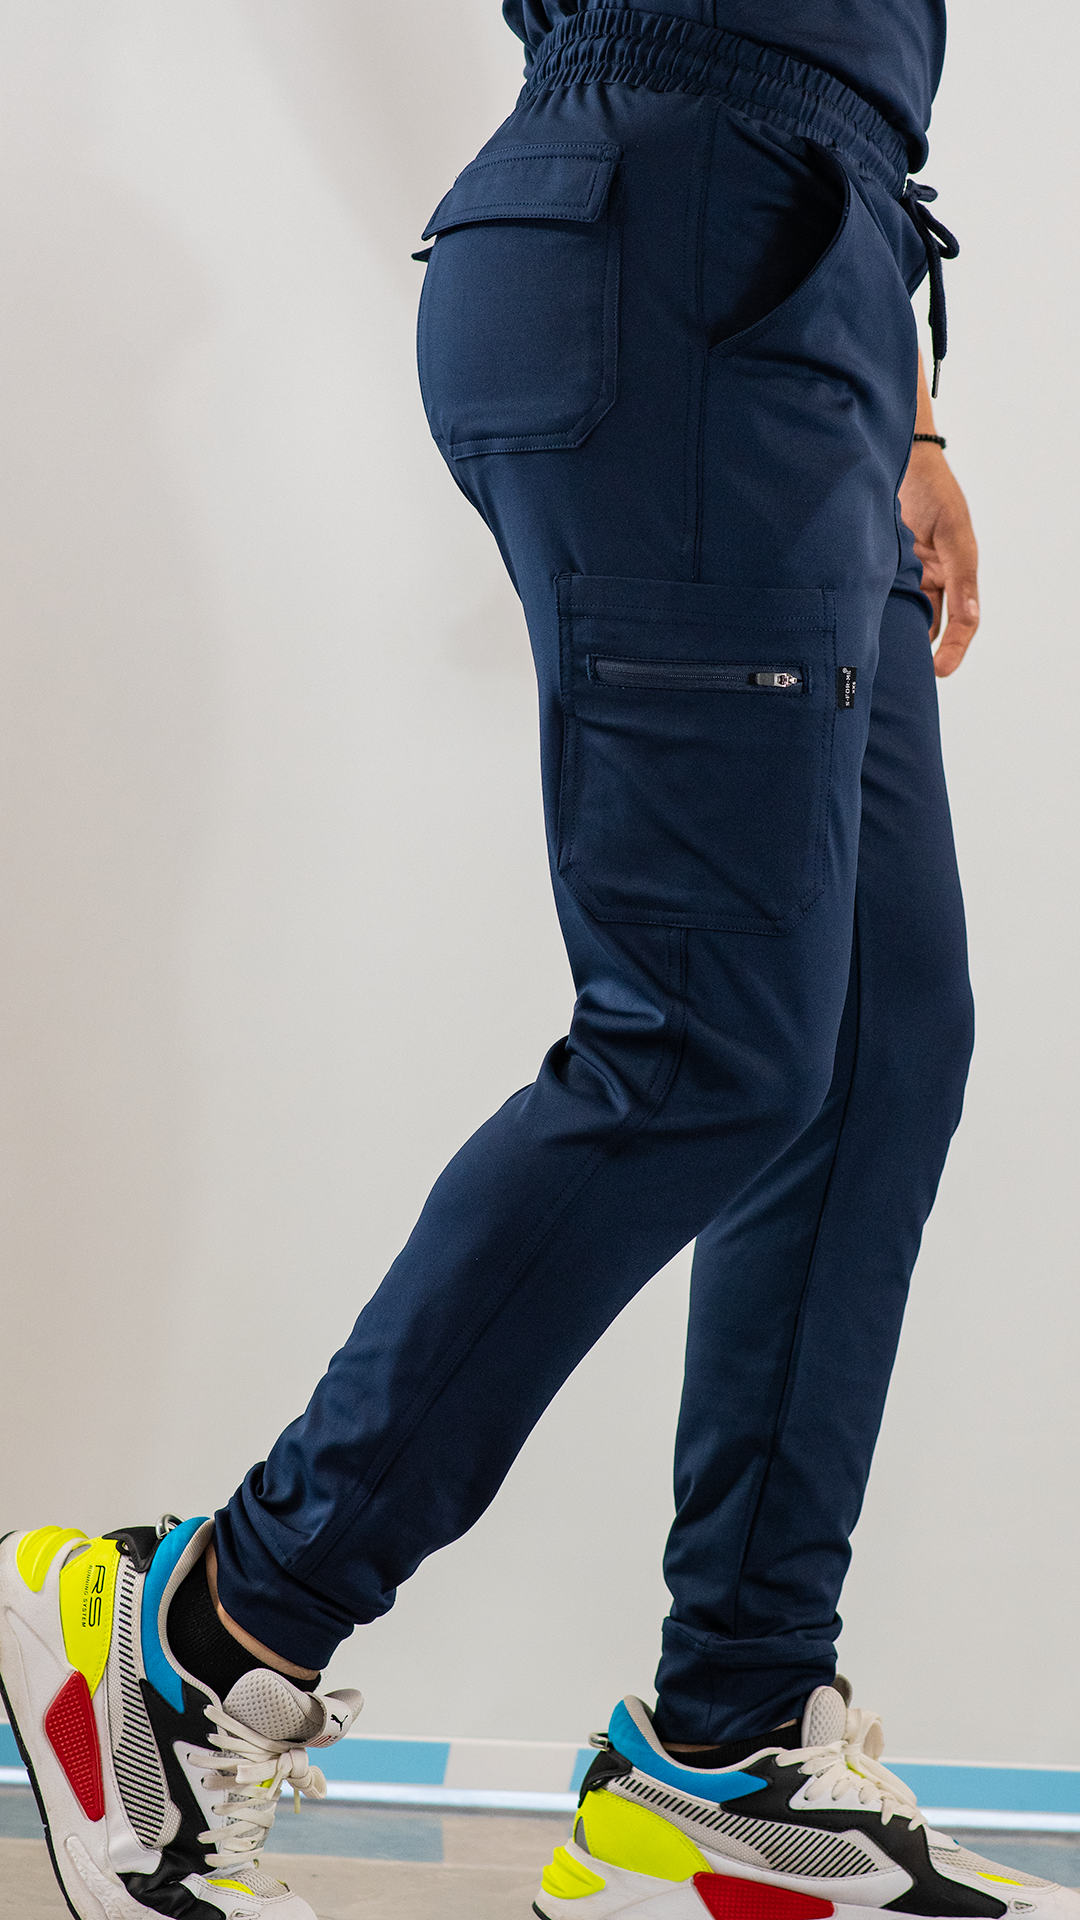 Jogger Woman 101 Fways Navy 6 Bags